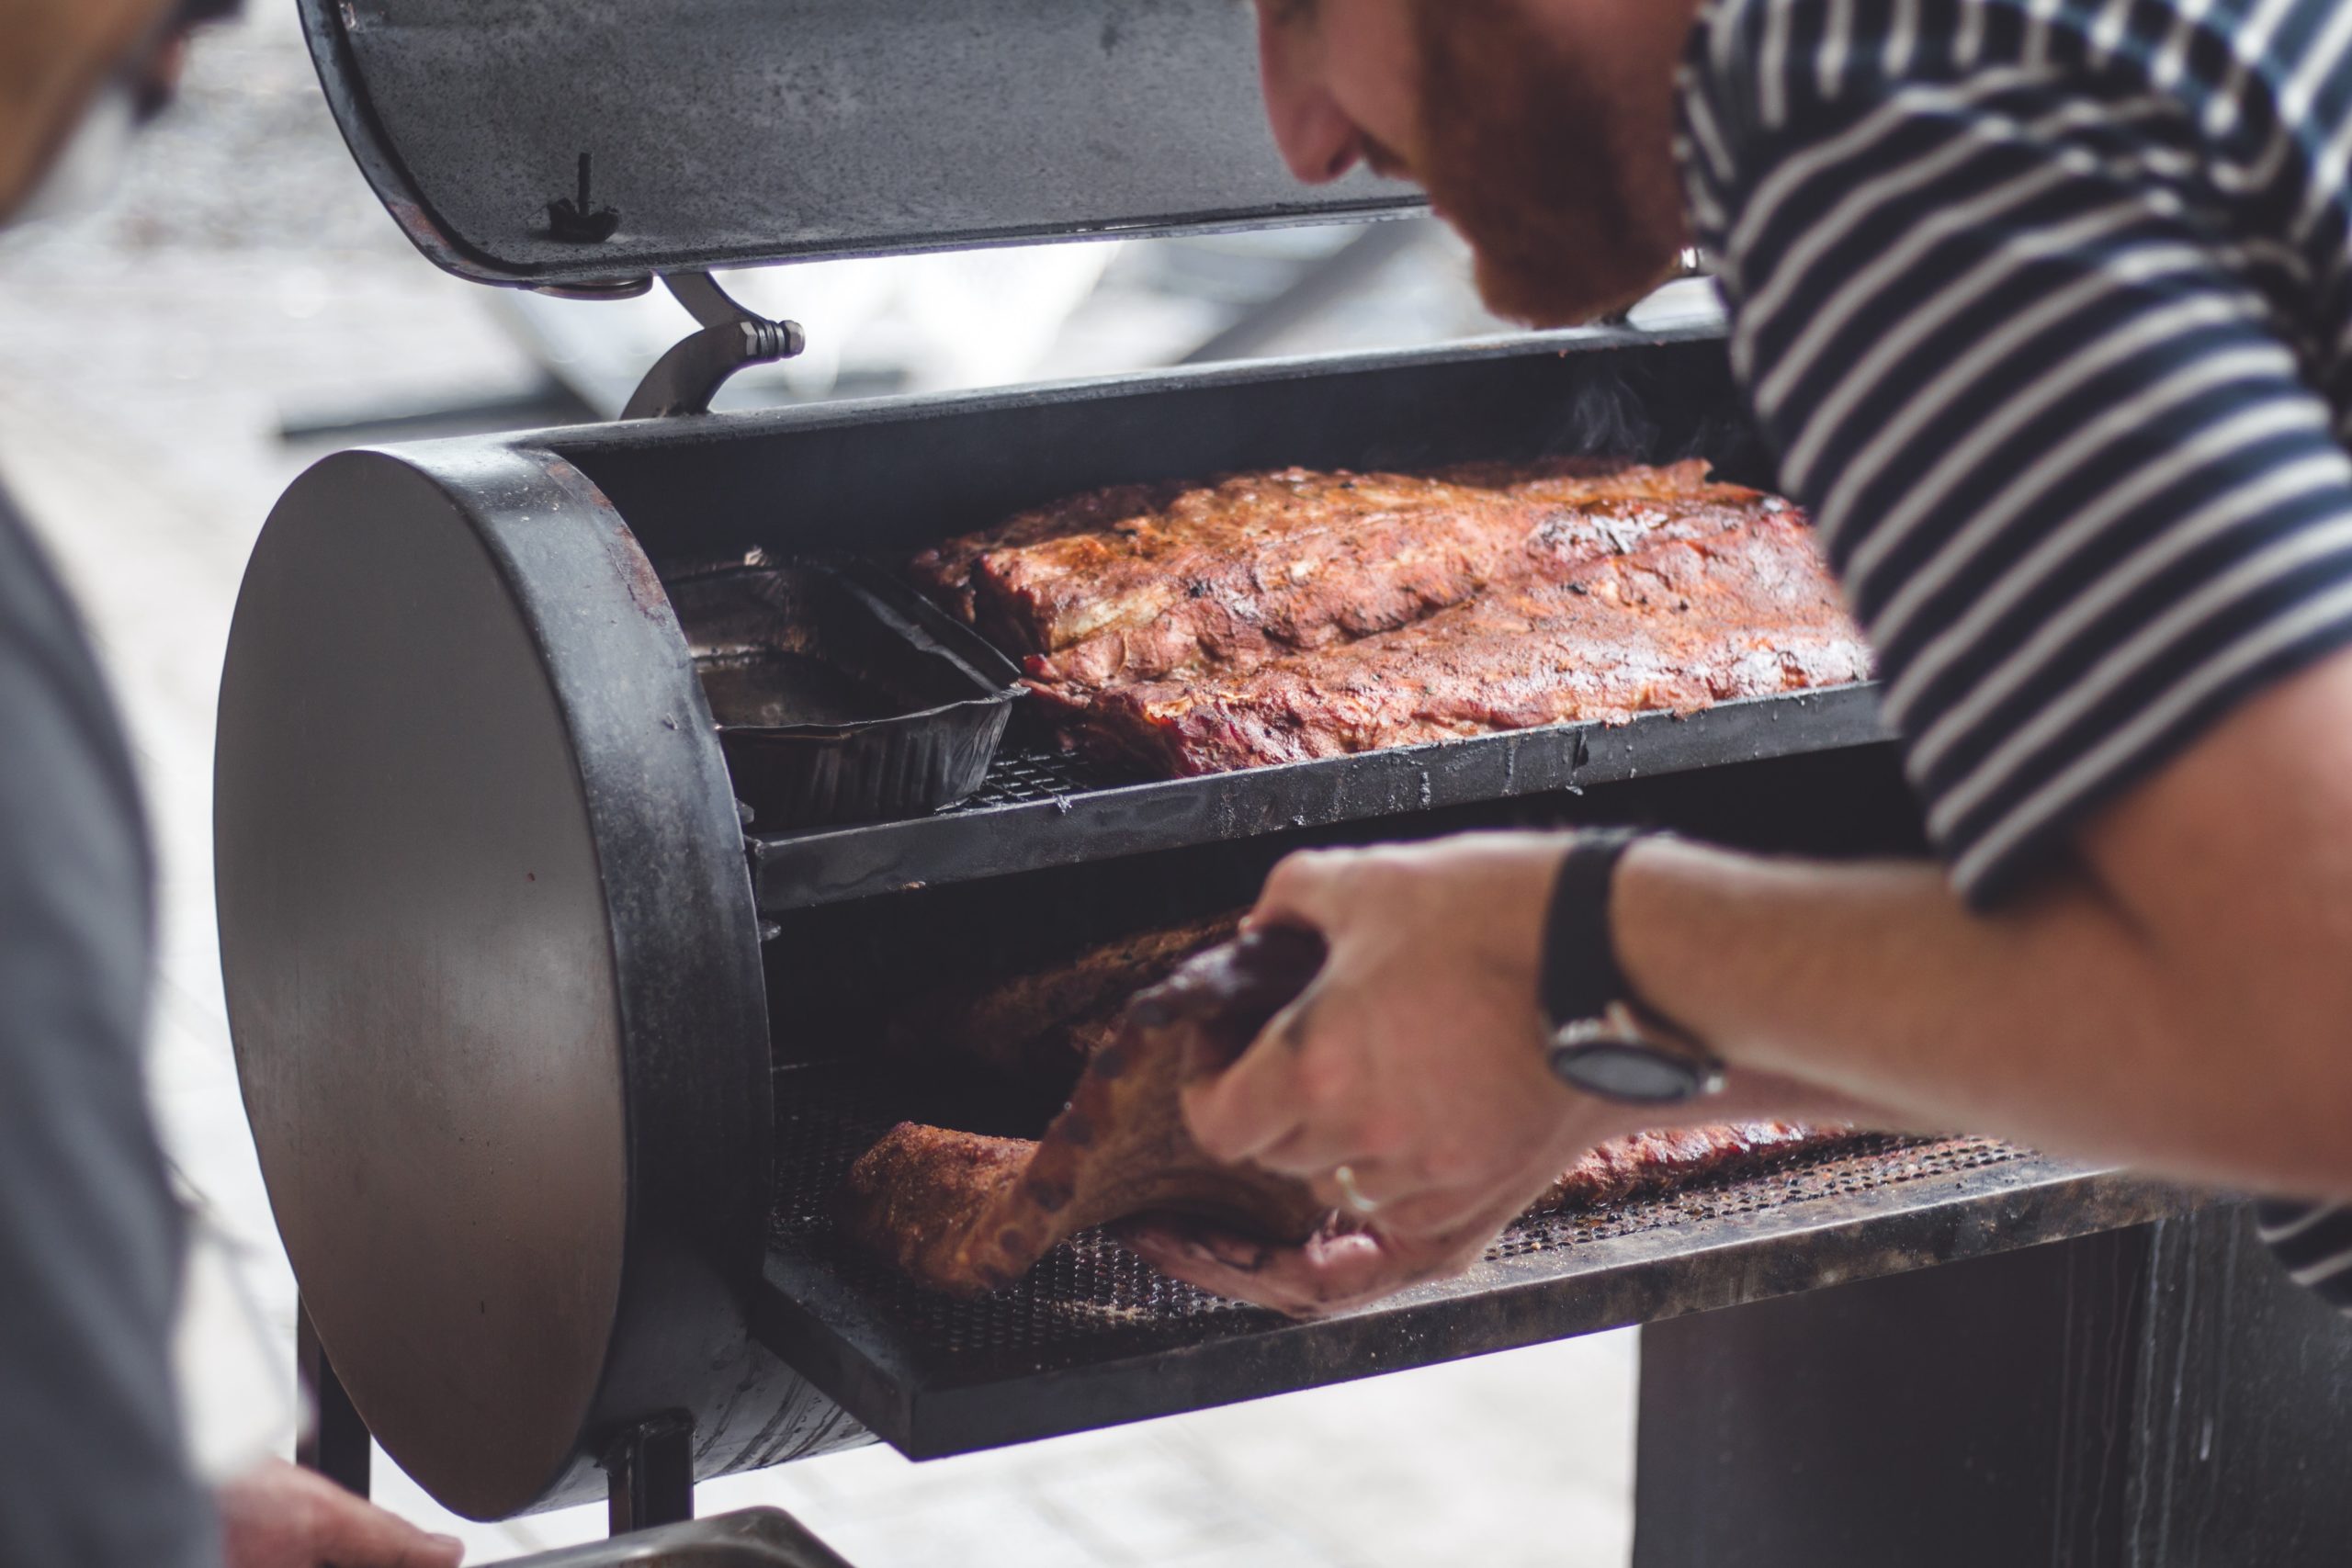 How to Build a Smoker Using a BBQ